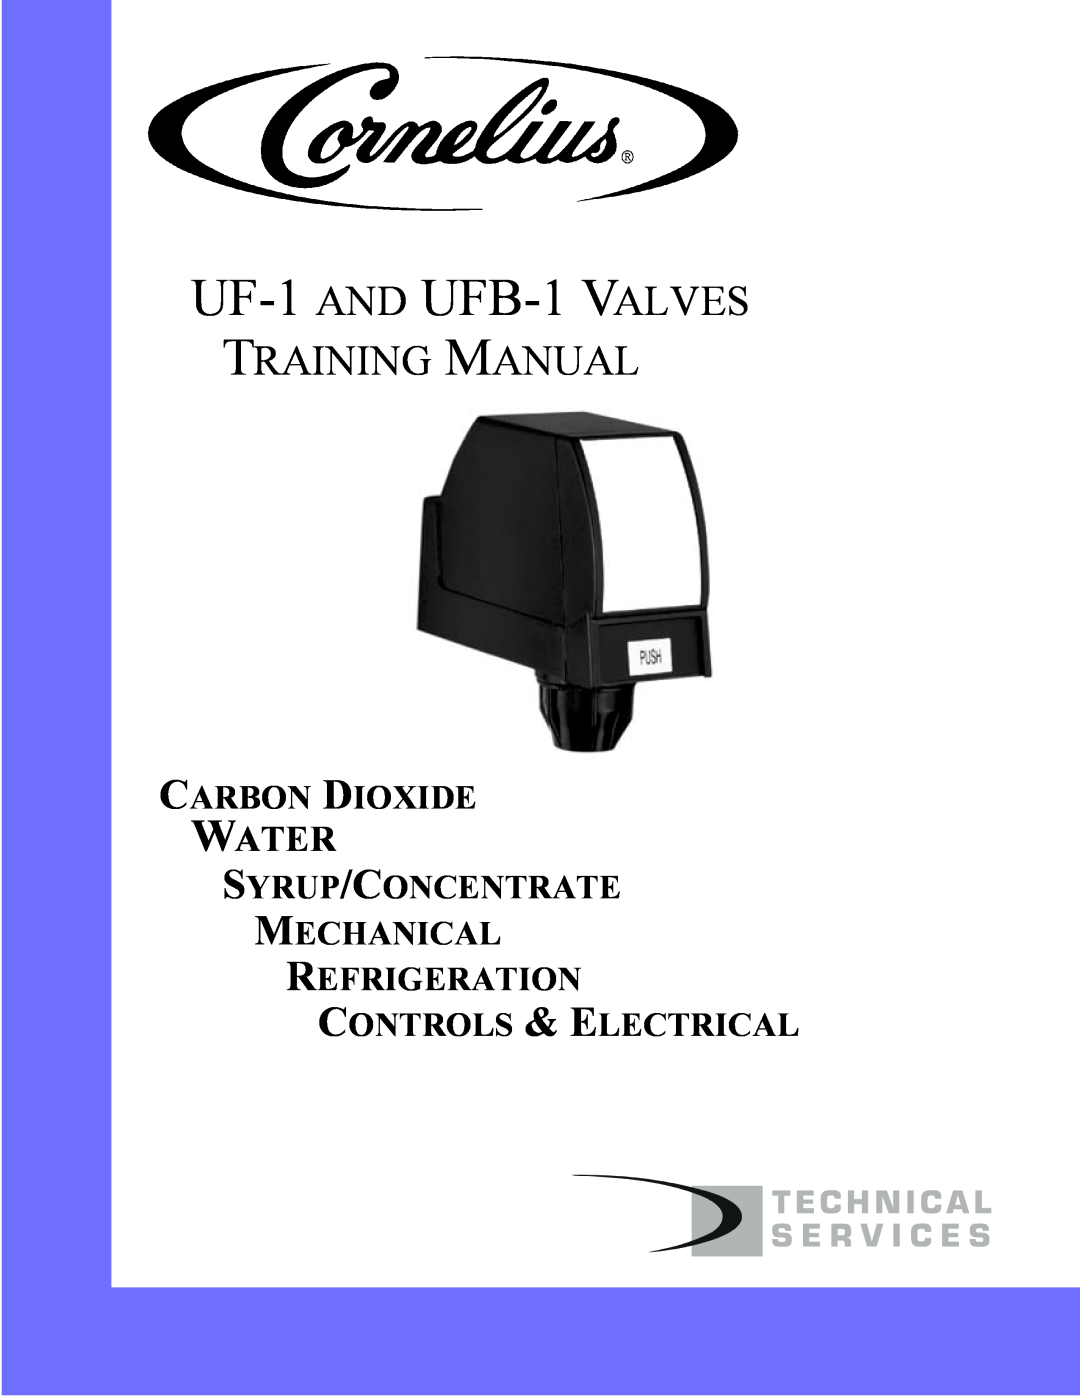 Cornelius manual Training Manual, UF-1 AND UFB-1VALVES, Water, Carbon Dioxide, Controls & Electrical 